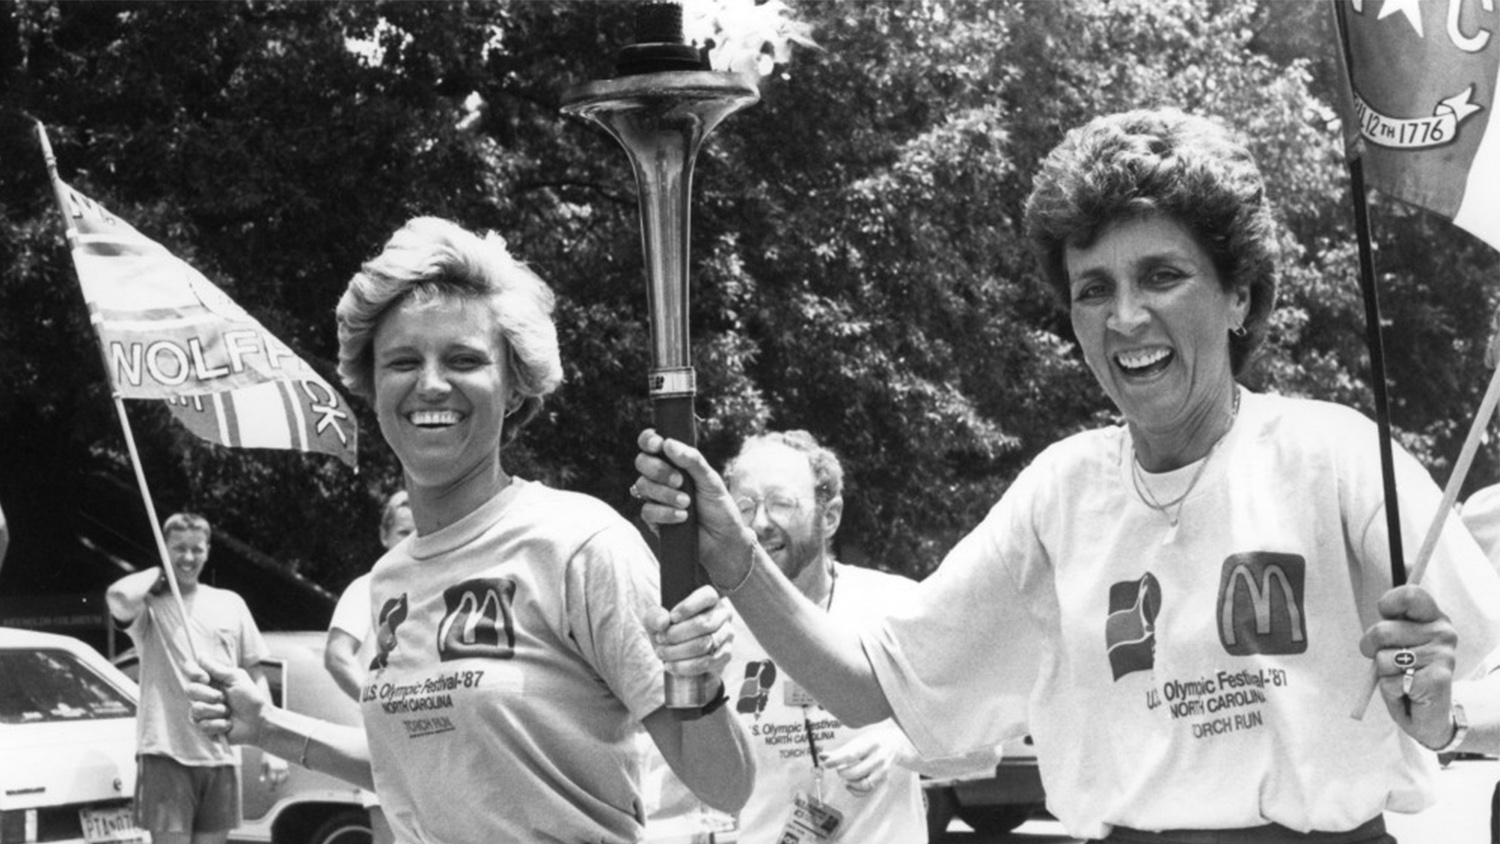 Kay Yow carrying the Olympic Torch in a Raleigh parade.